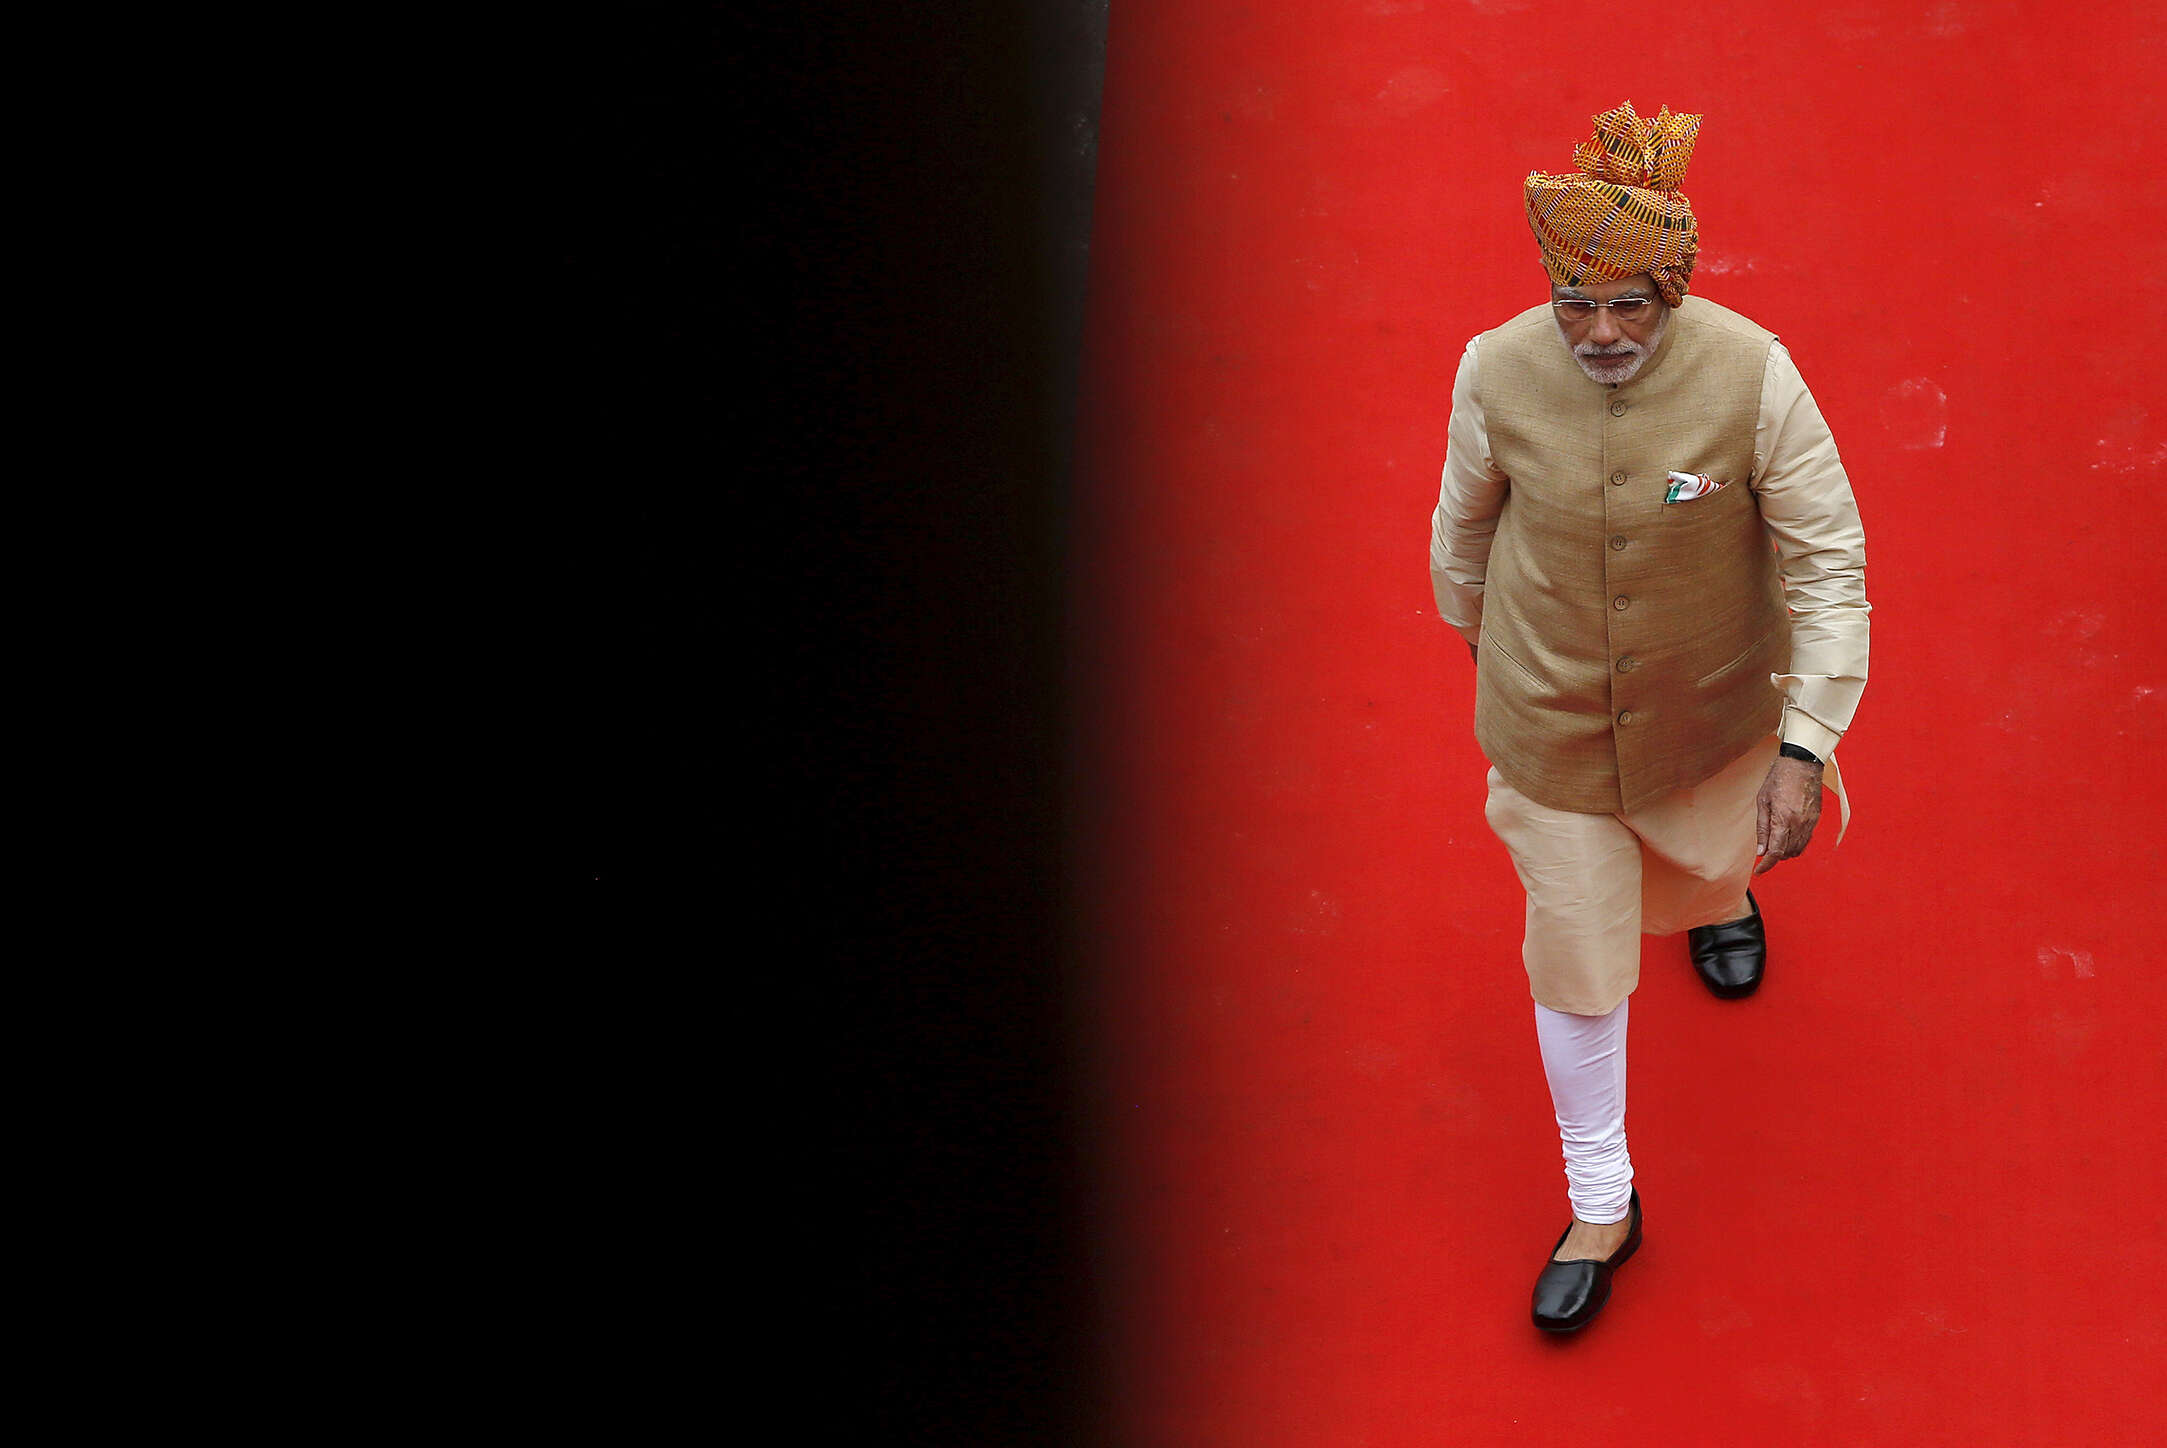 India reveres its democracy, but the room for dissent is shrinking